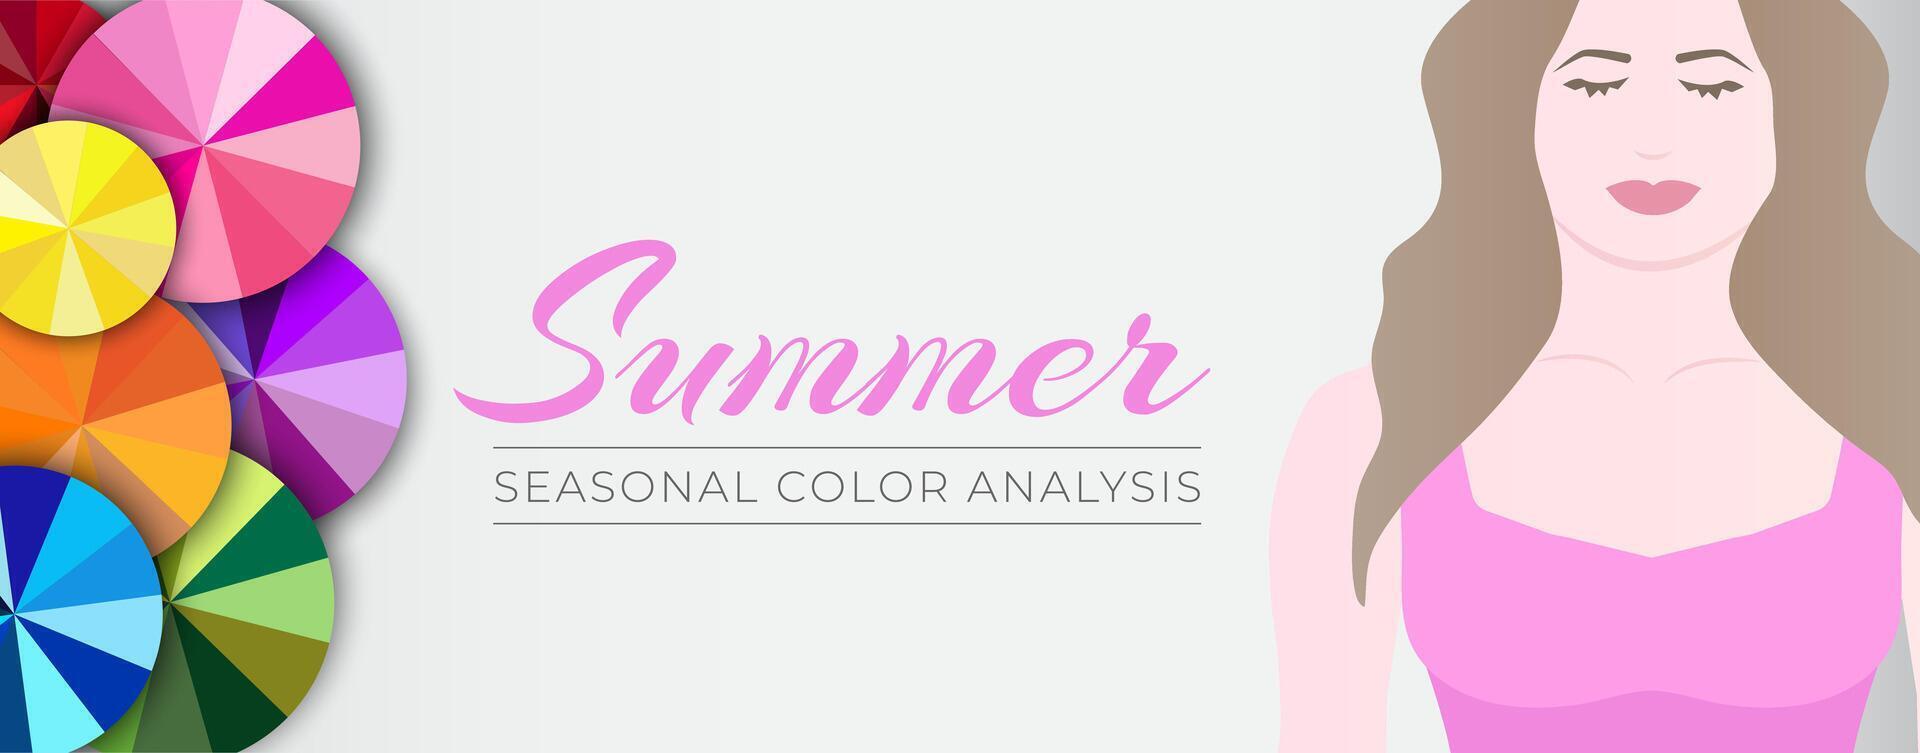 Seasonal Color Analysis Summer Banner Illustration with Color Wheels vector